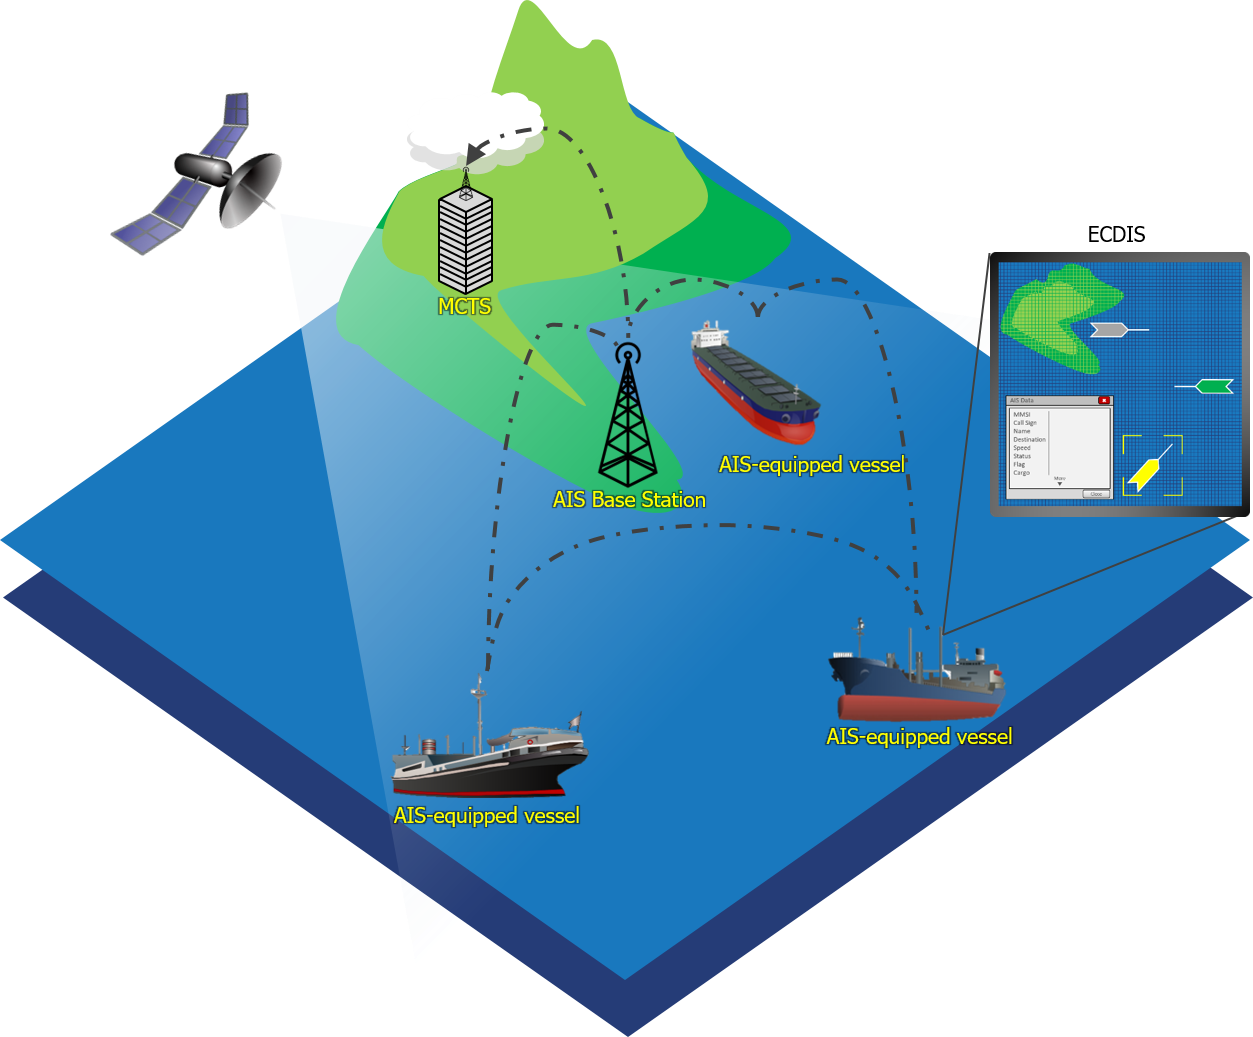 Automatic Identification System (AIS) on the Ships